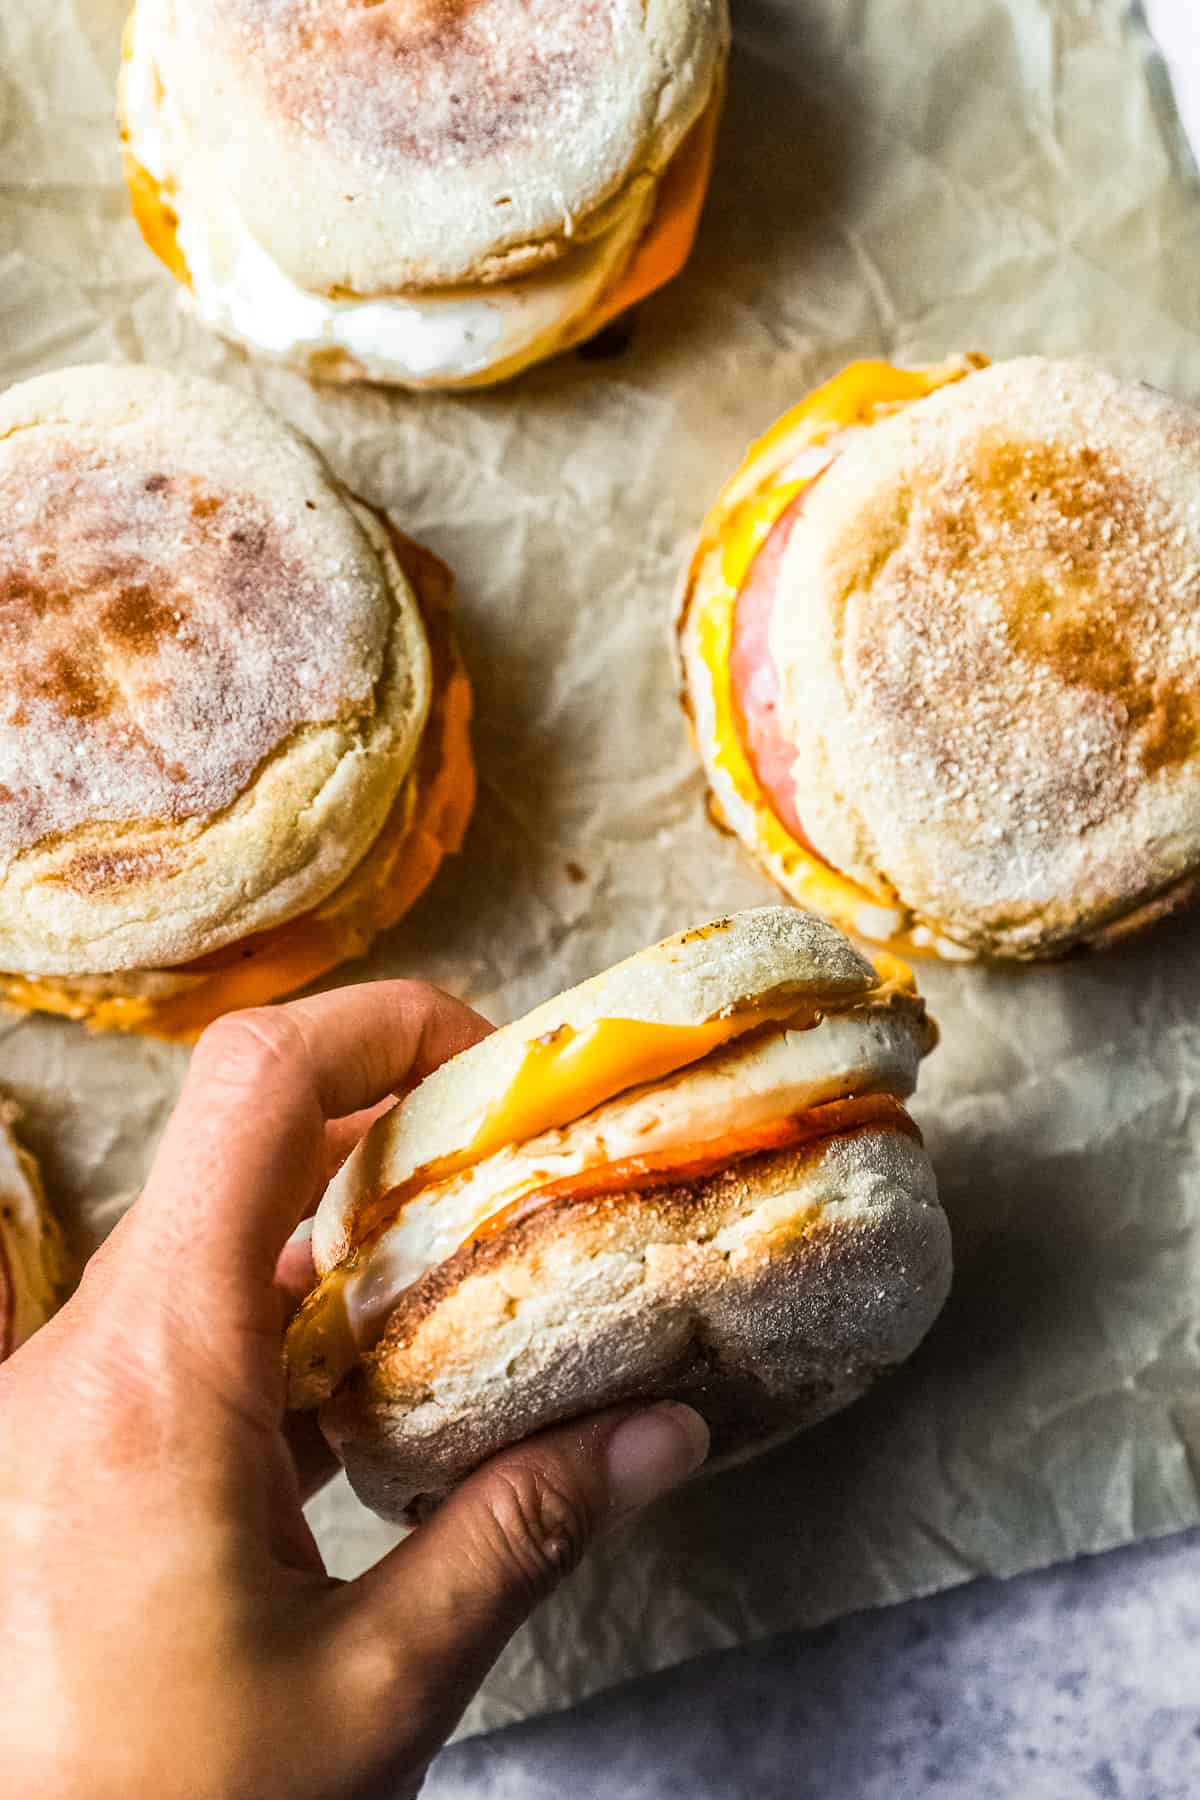 Homemade Egg McMuffins - A Paige of Positivity